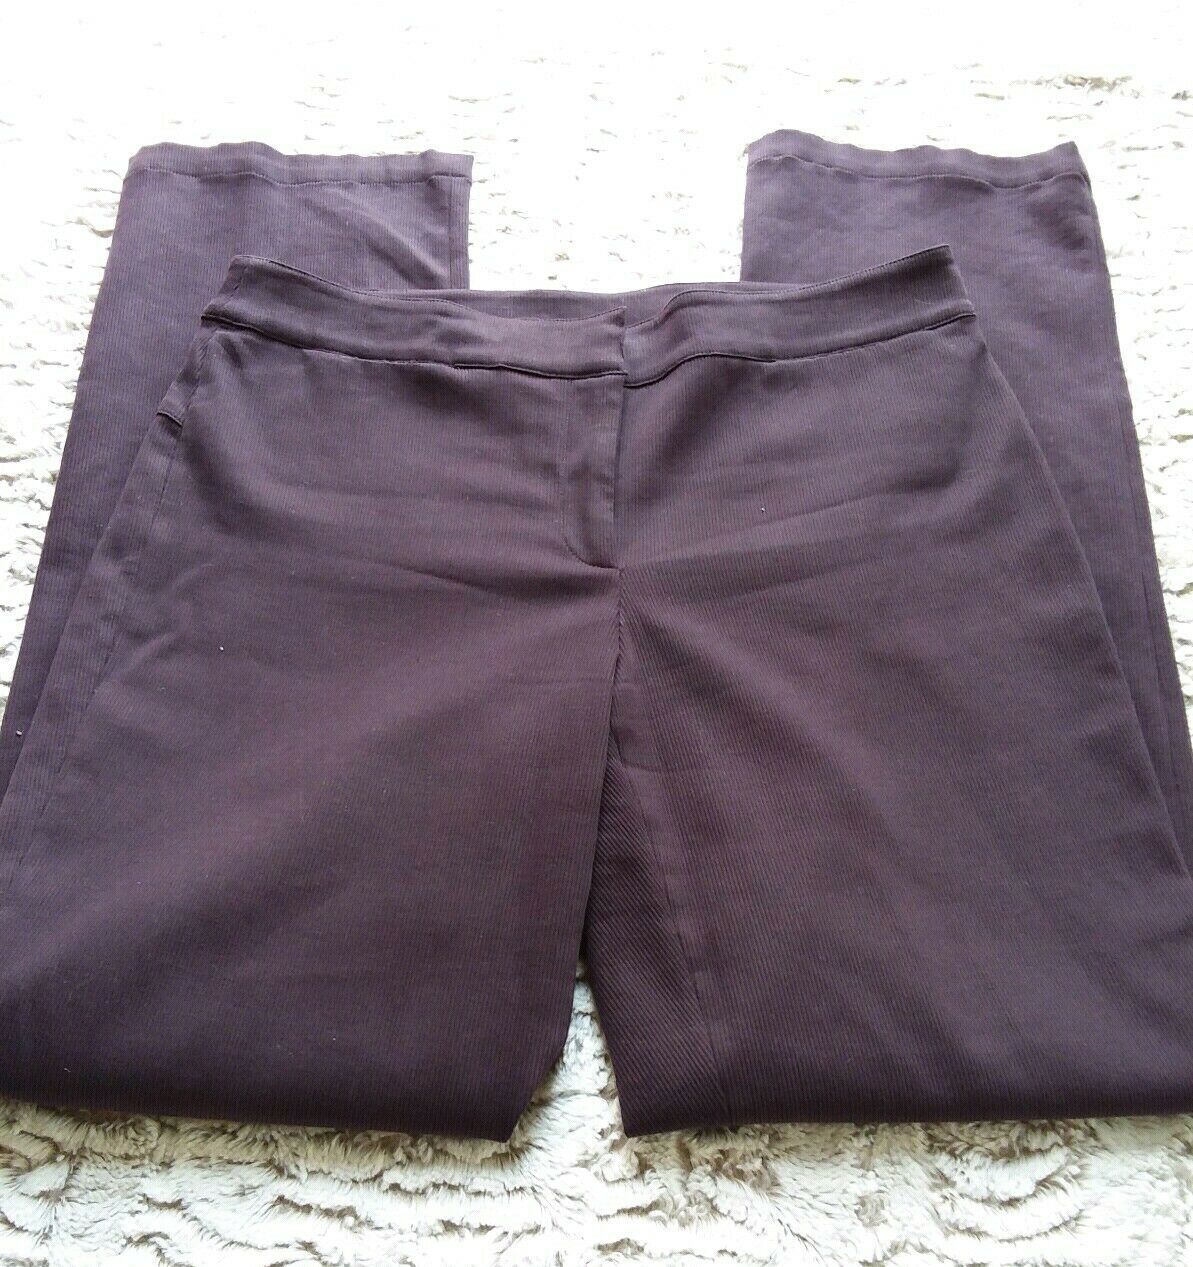 Primary image for Eileen Fisher Dress Pants Sz S Dark Purple Ribbed Stretch Flat Front Zip Closure